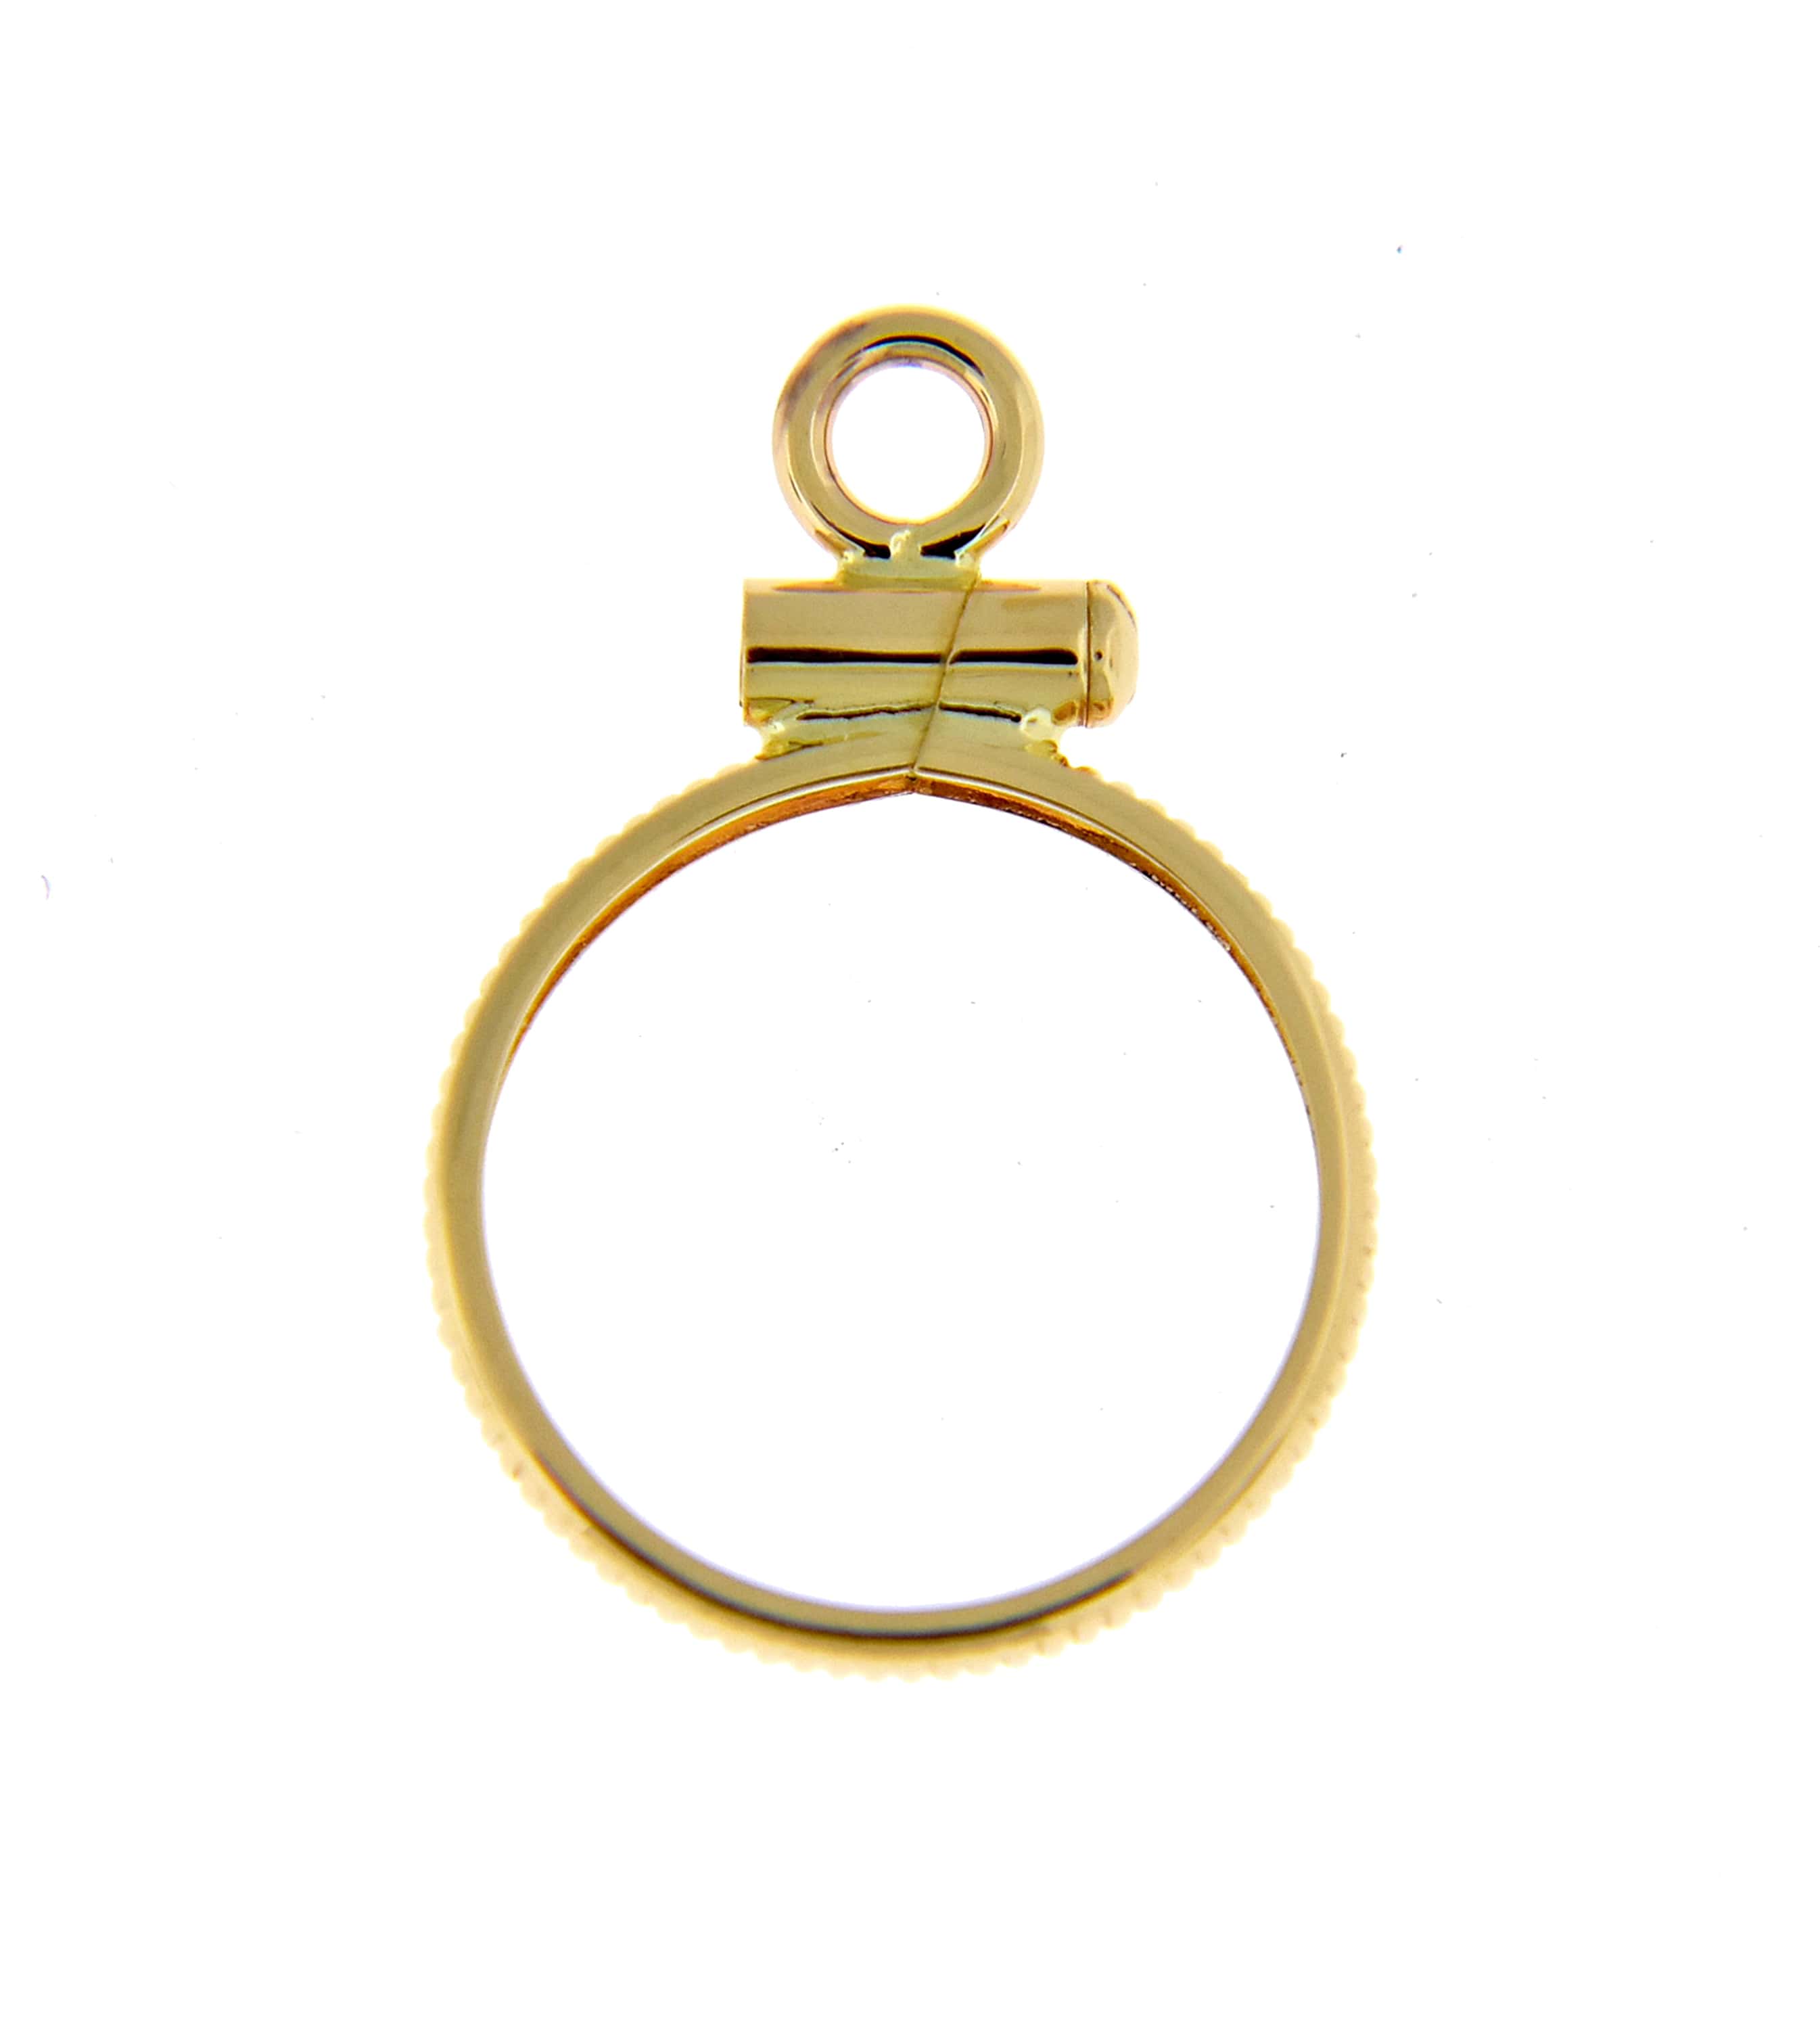 14K Yellow Gold Holds 13mm x 1mm Coins United States 1.00 Dollar Mexican 2 Peso Coin Edge Screw Top Frame Mounting Holder